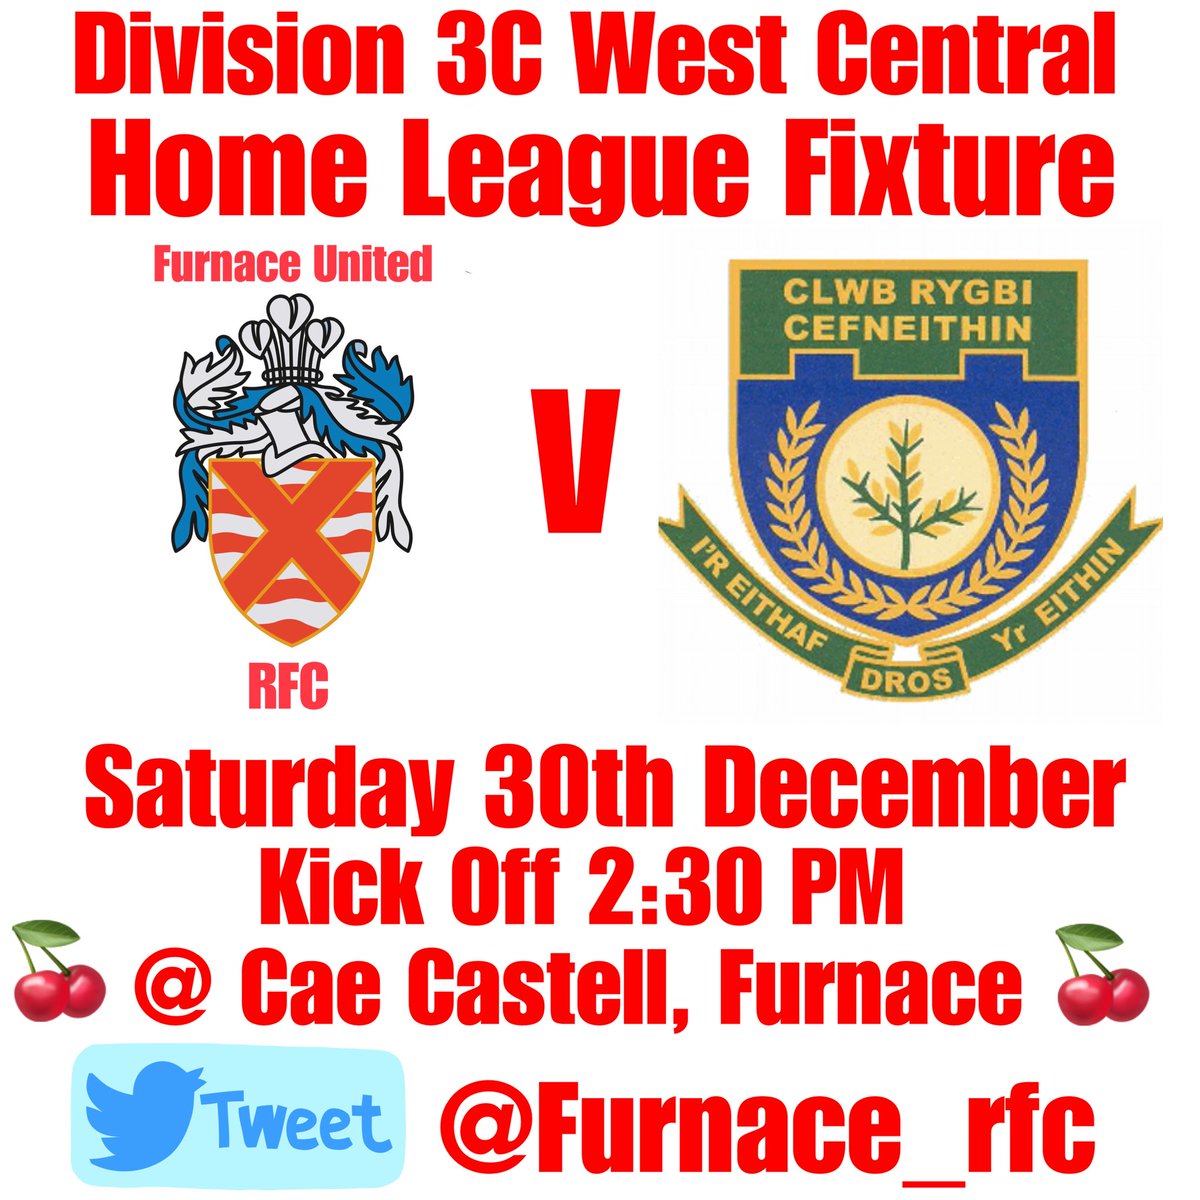 Festive rugby returns to Cae Castell Furnace on the 30th of December with a League fixture against @CefneithinRFC. All support is gratefully appreciated #🍒 #TheFireIsRising